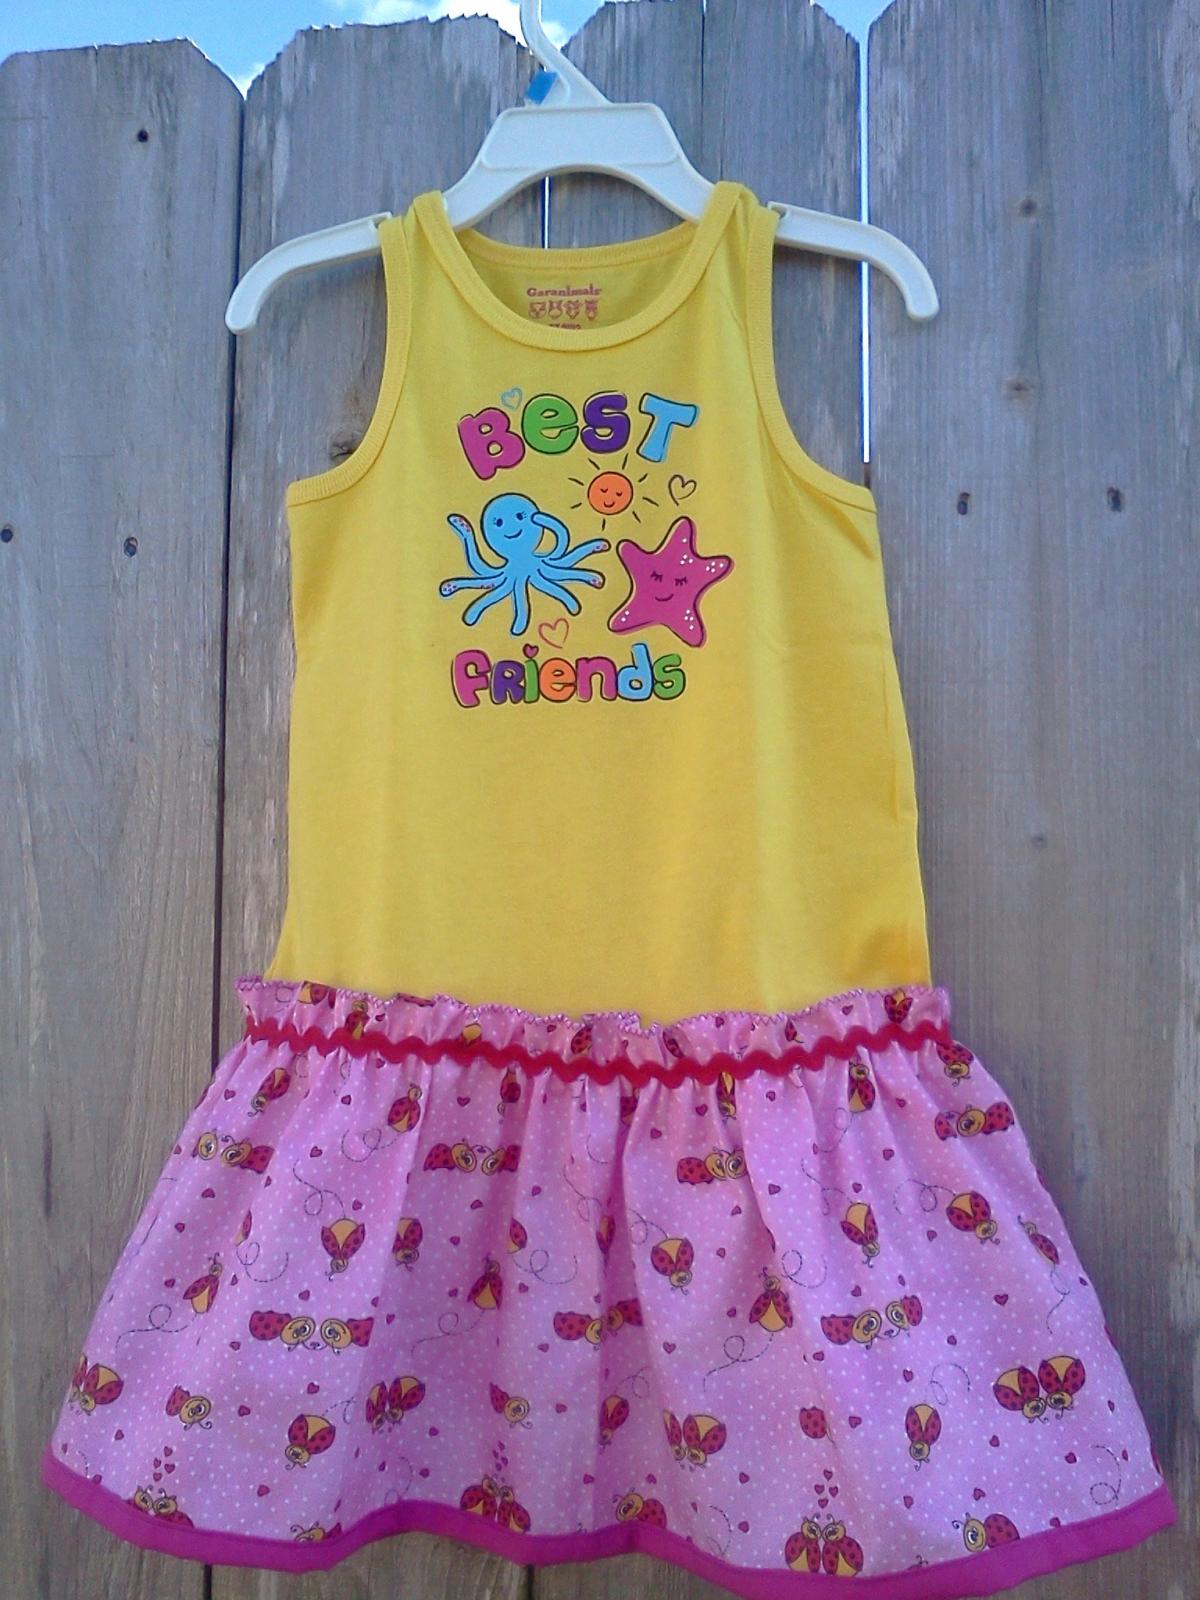 Upcycled Girl's Yellow Tank Top, Lady Bug Dress, Size 3t